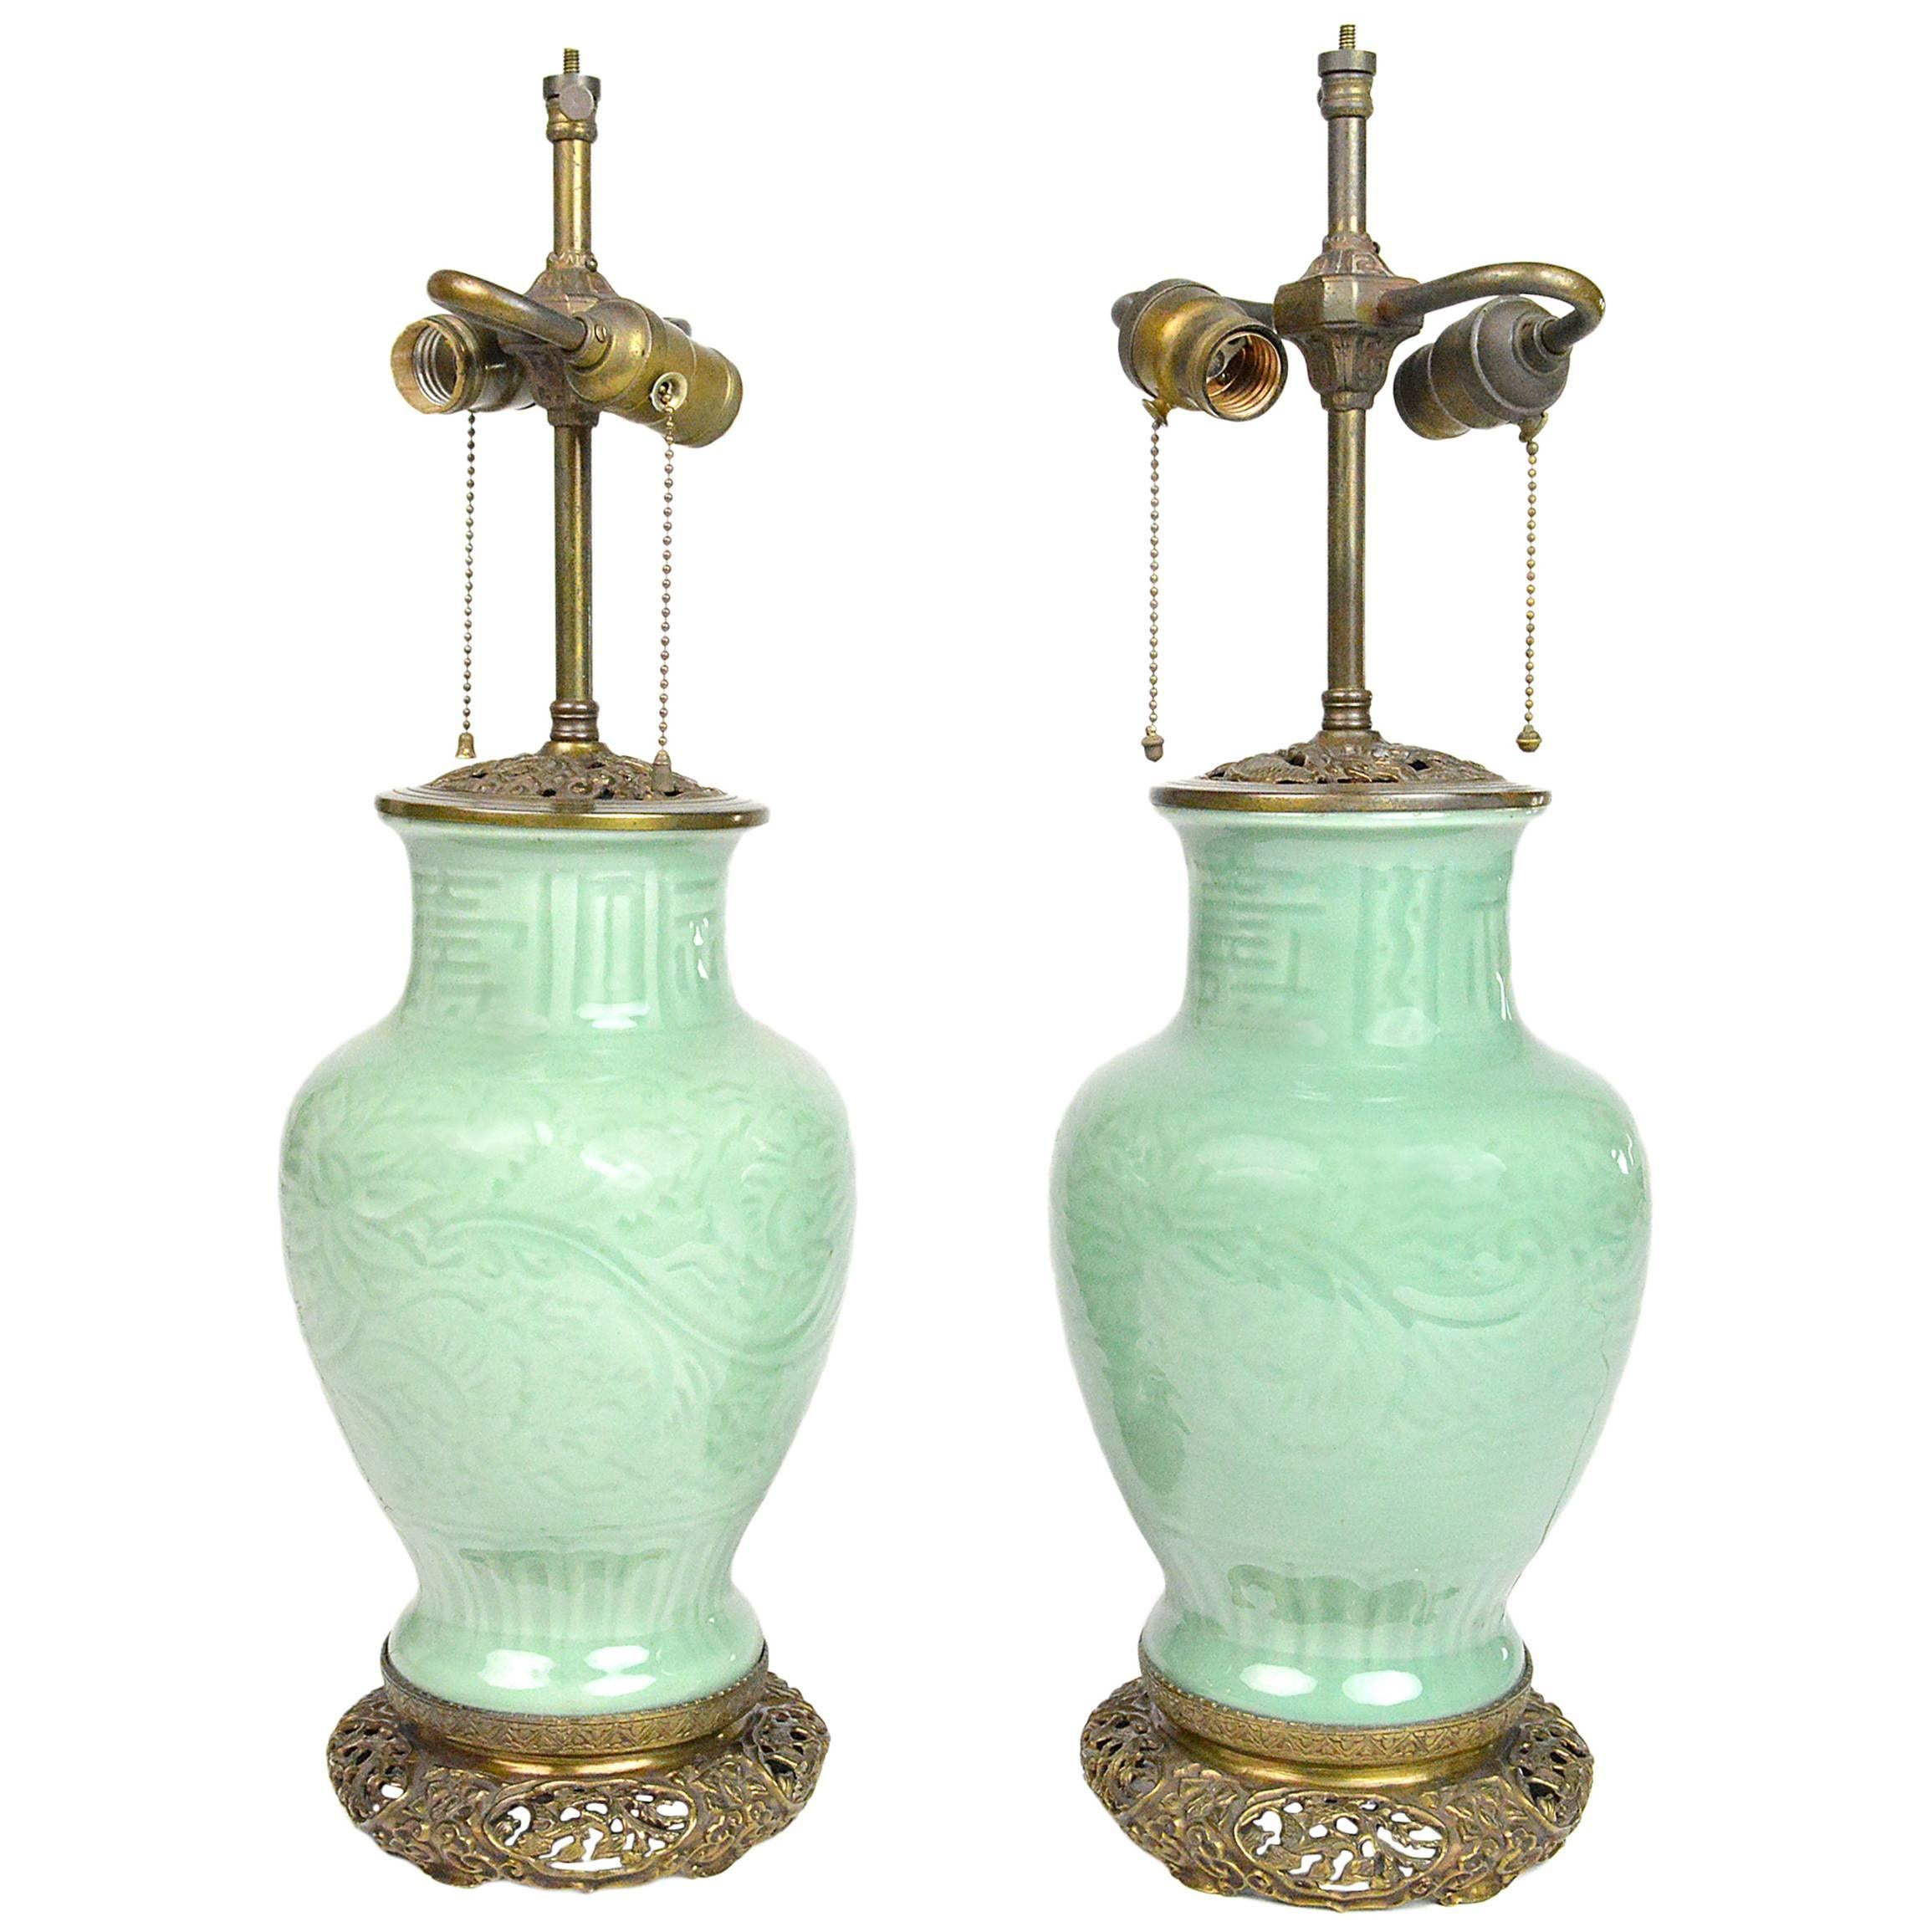 Pair of Chinese Celadon Porcelain Lamps